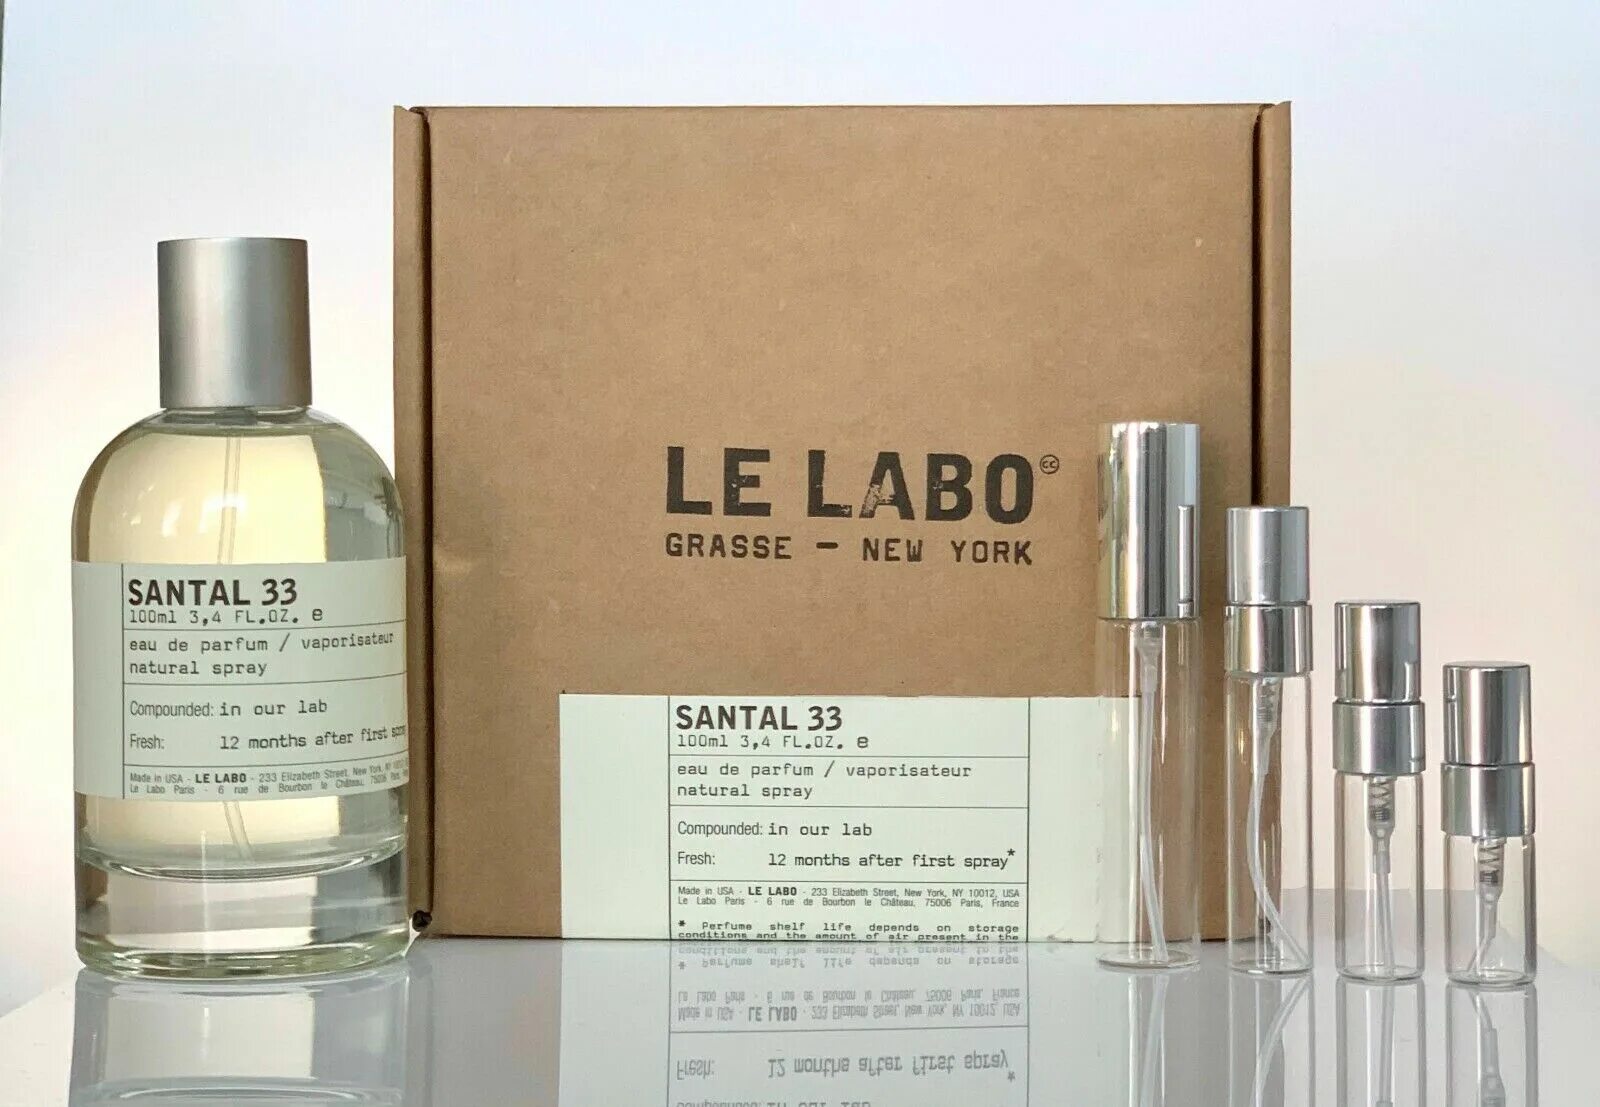 Another 13 купить. Le Labo Santal 33 10 мл. Духи le Labo another 13. Парфюмерная вода le Labo Santal 33. Le Labo grasse New York Santal 33.